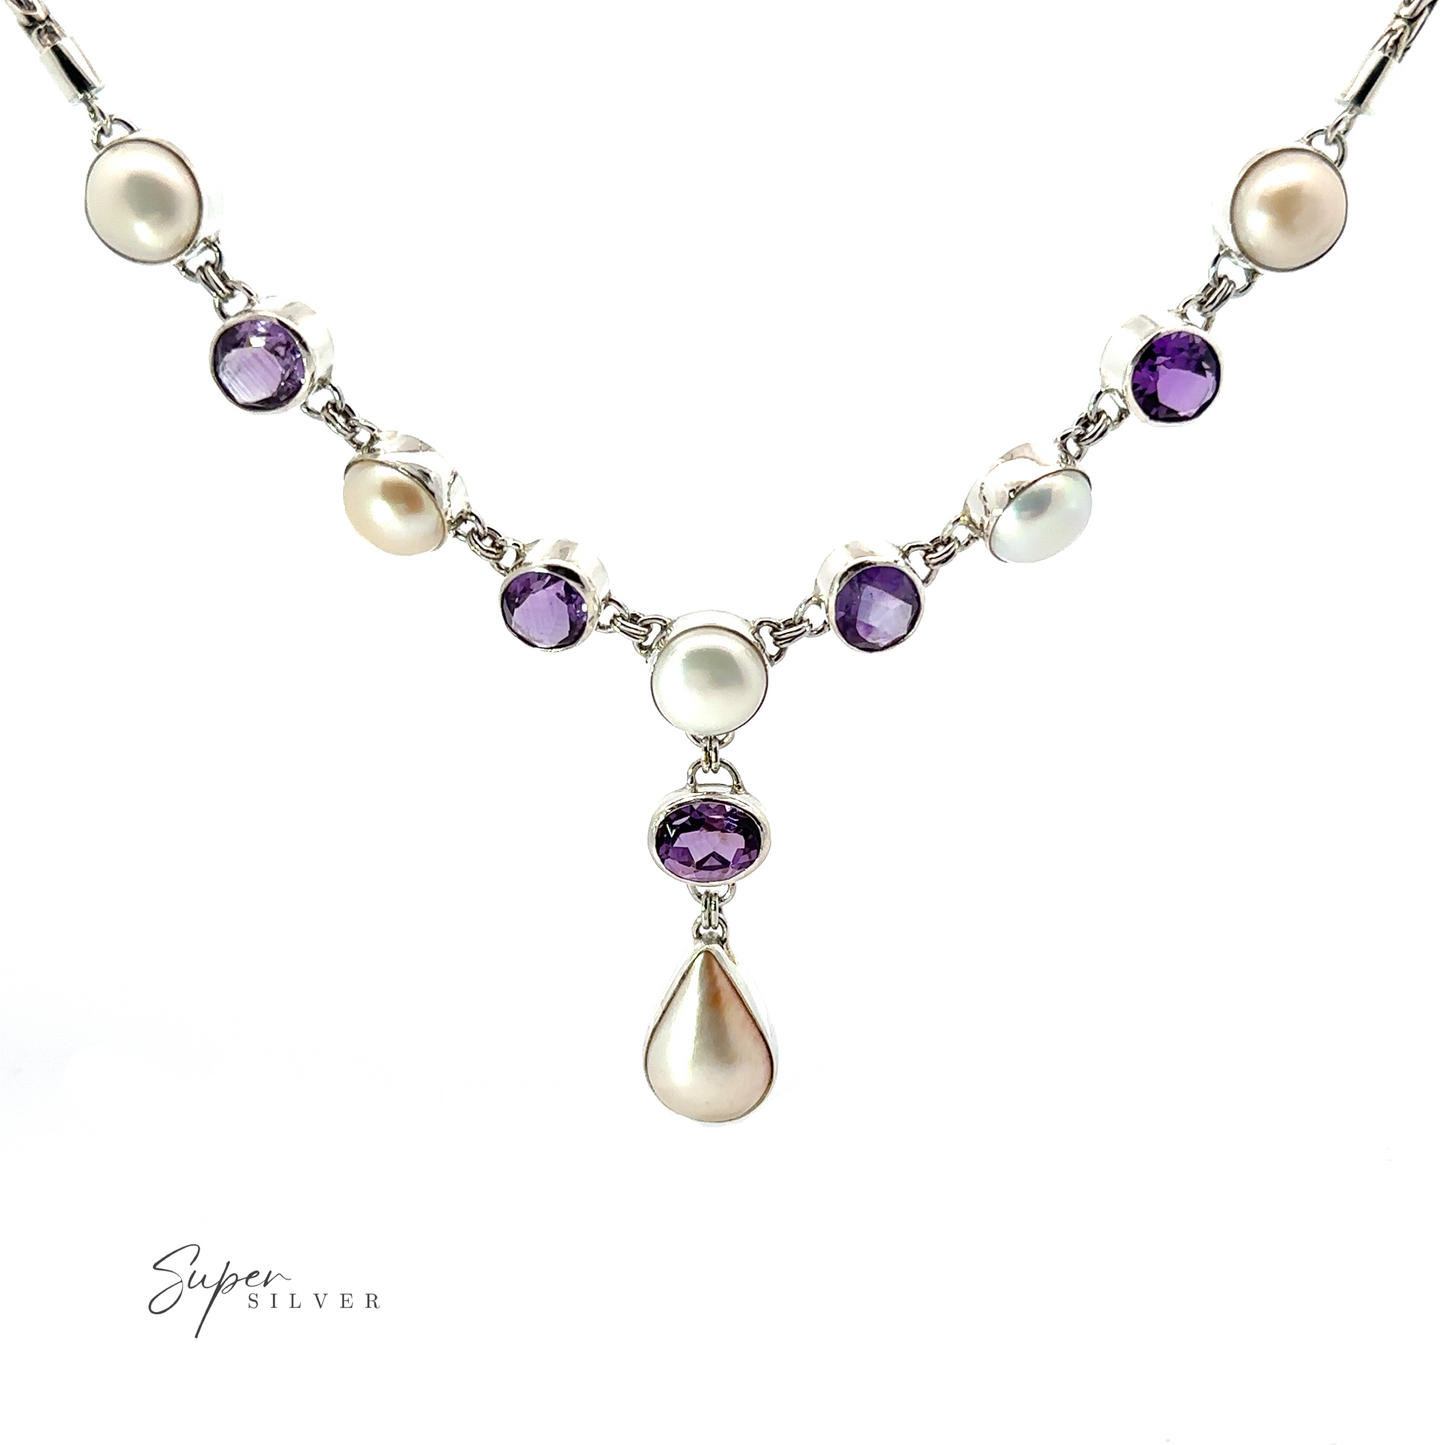 A Stunning Pearl and Gemstone Statement Necklace featuring alternating purple gemstones and pearls, with a central drop-shaped pearl pendant. Text on the lower left reads "Super Silver.